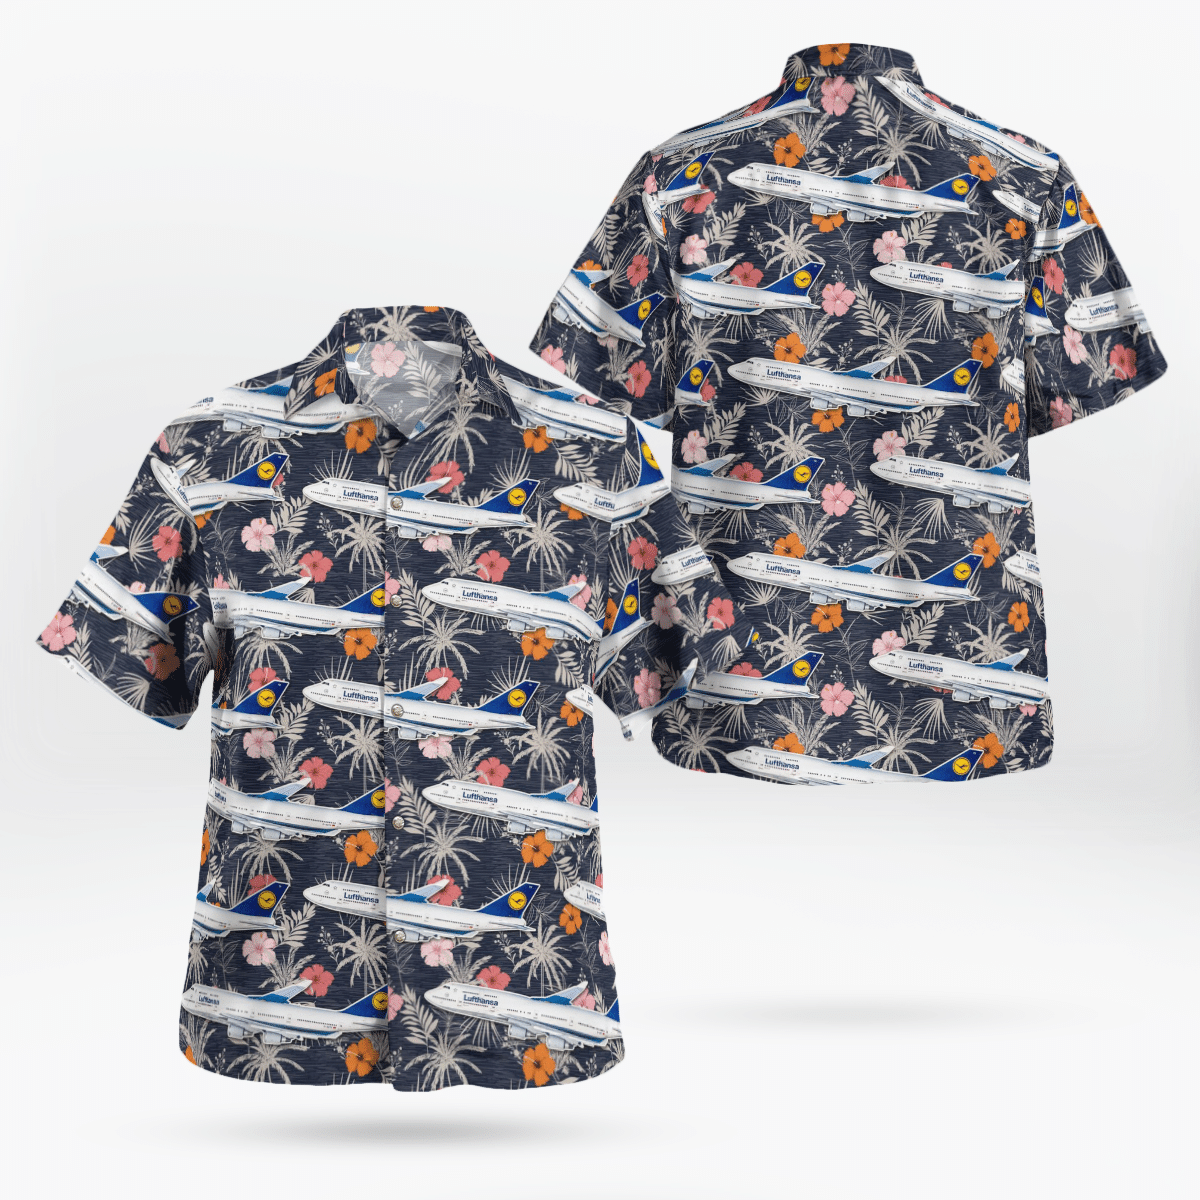 Shop now to find the perfect Hawaii Shirt for your hobby 71